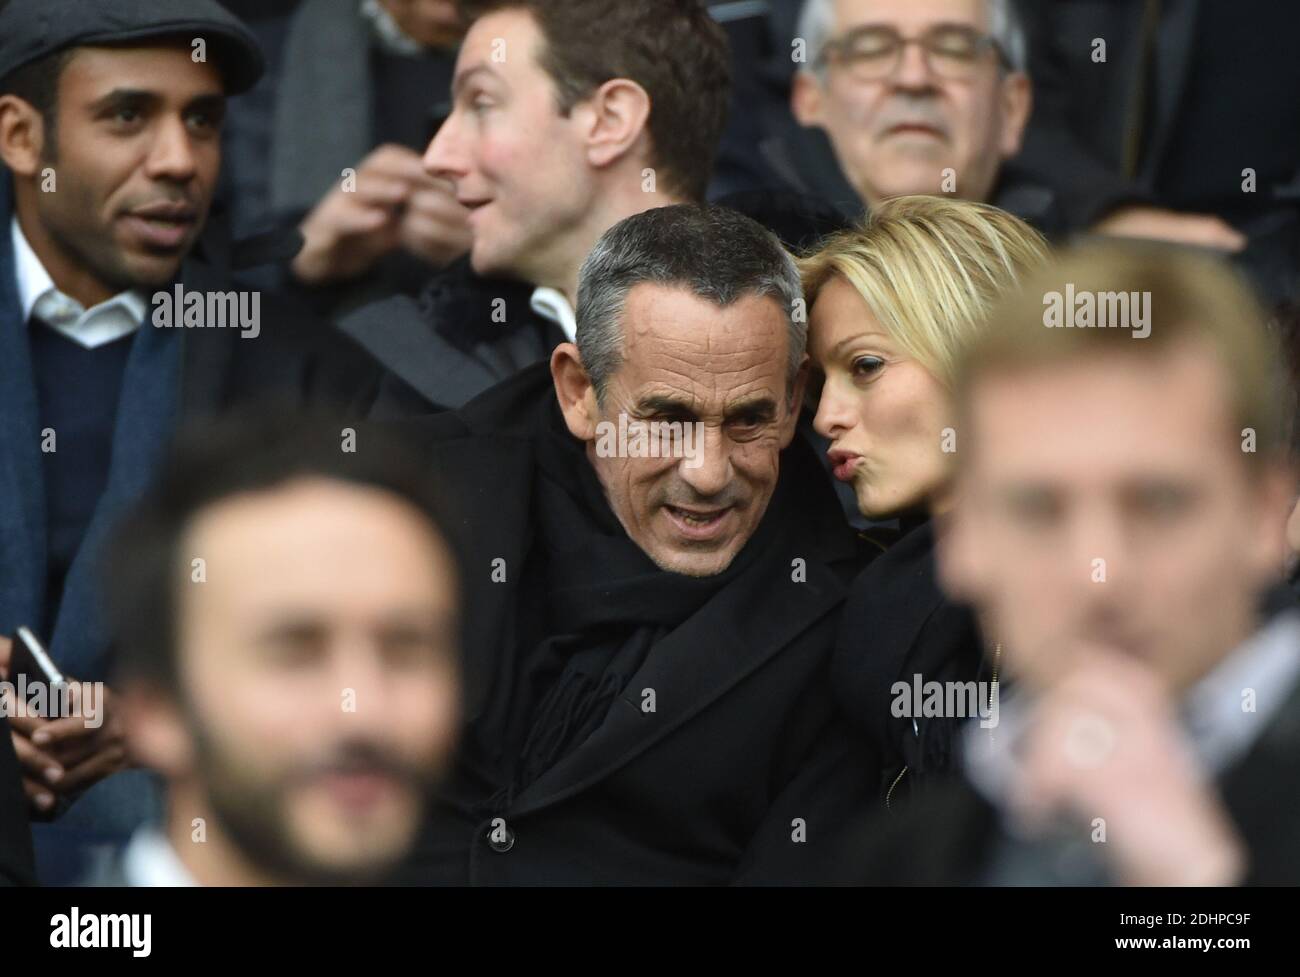 Loup-Denis Elion, TThierry Ardisson and his wife Audrey Crespo-Mara attending the French First League (L1) football match between Paris Saint-Germain (PSG) and Reims at the Parc des Princes stadium in Paris, France on February 20, 2016. PSG won 4-1. Photo by Christian Liewig/ABACAPRESS.COM Stock Photo